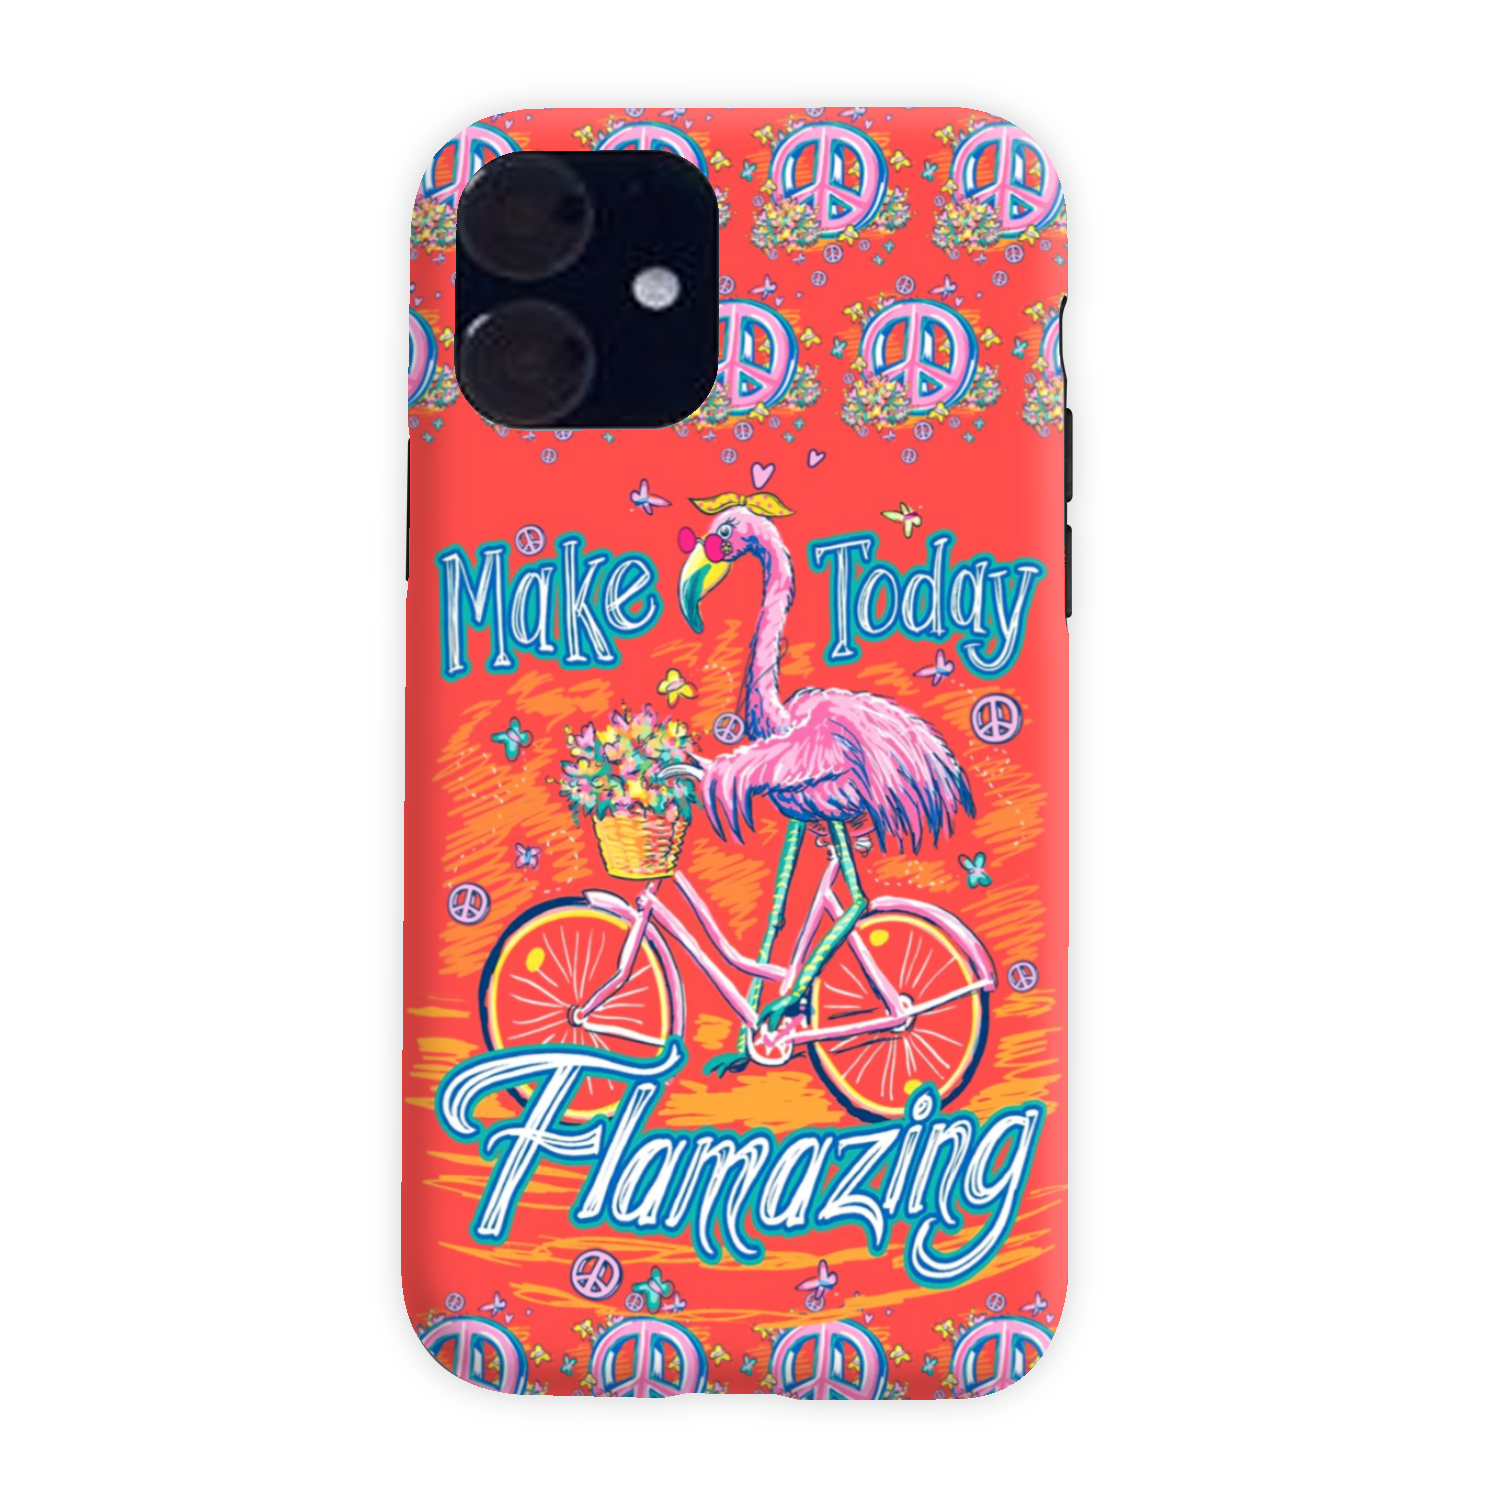 MAKE TODAY FLAMAZING PHONE CASE - TY0206232